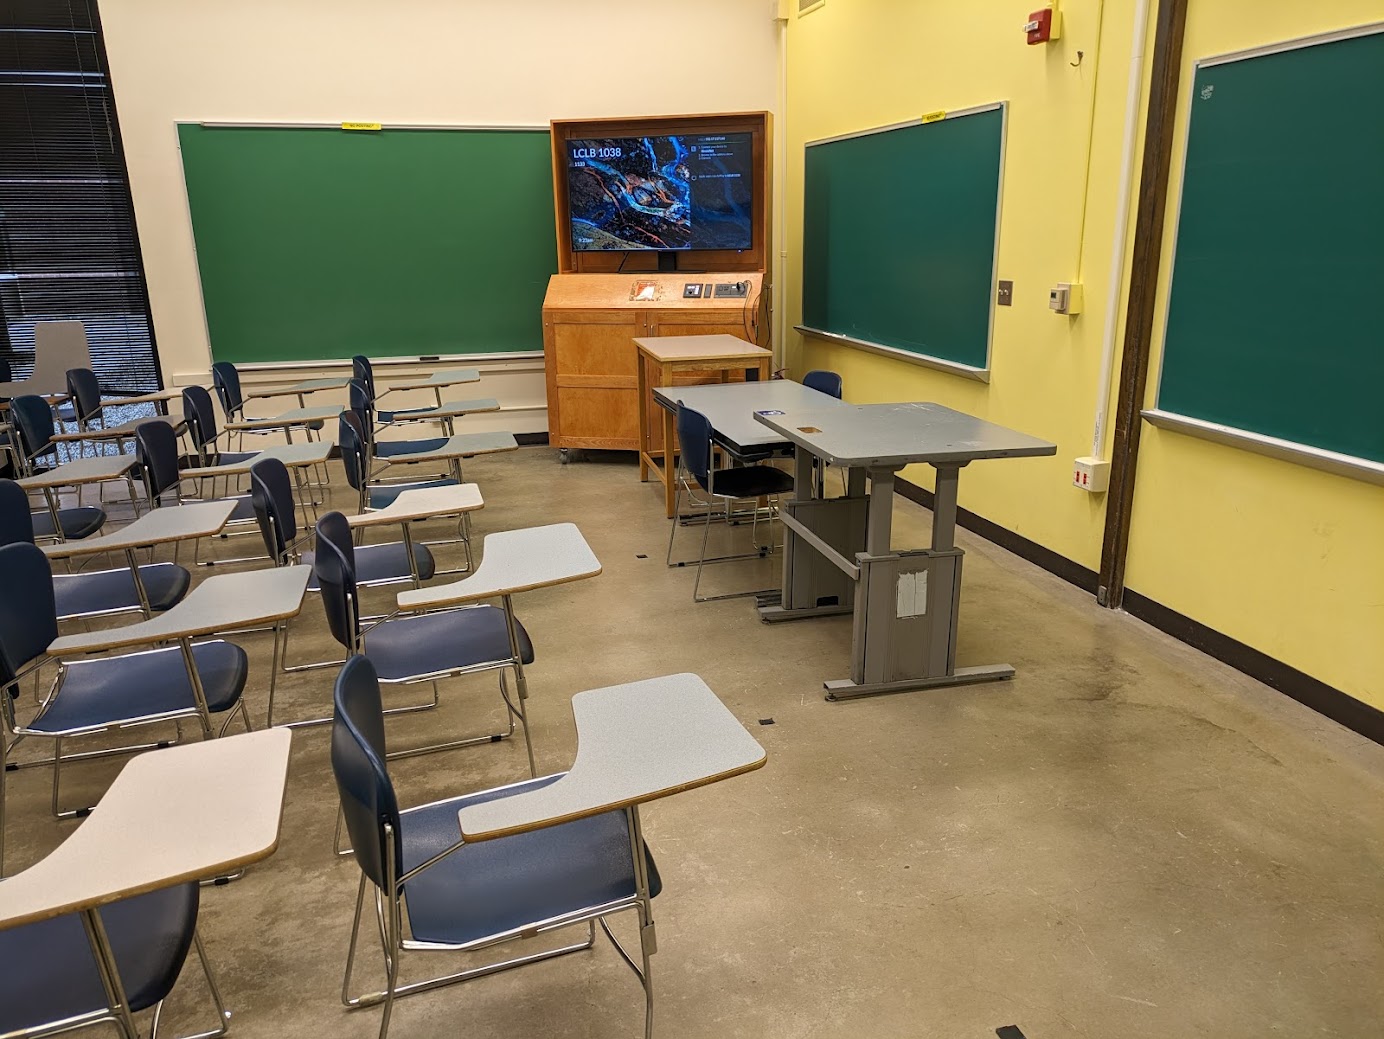 A view of the classroom with movable tableted arm chairs, chalkboards and instructor table in font.